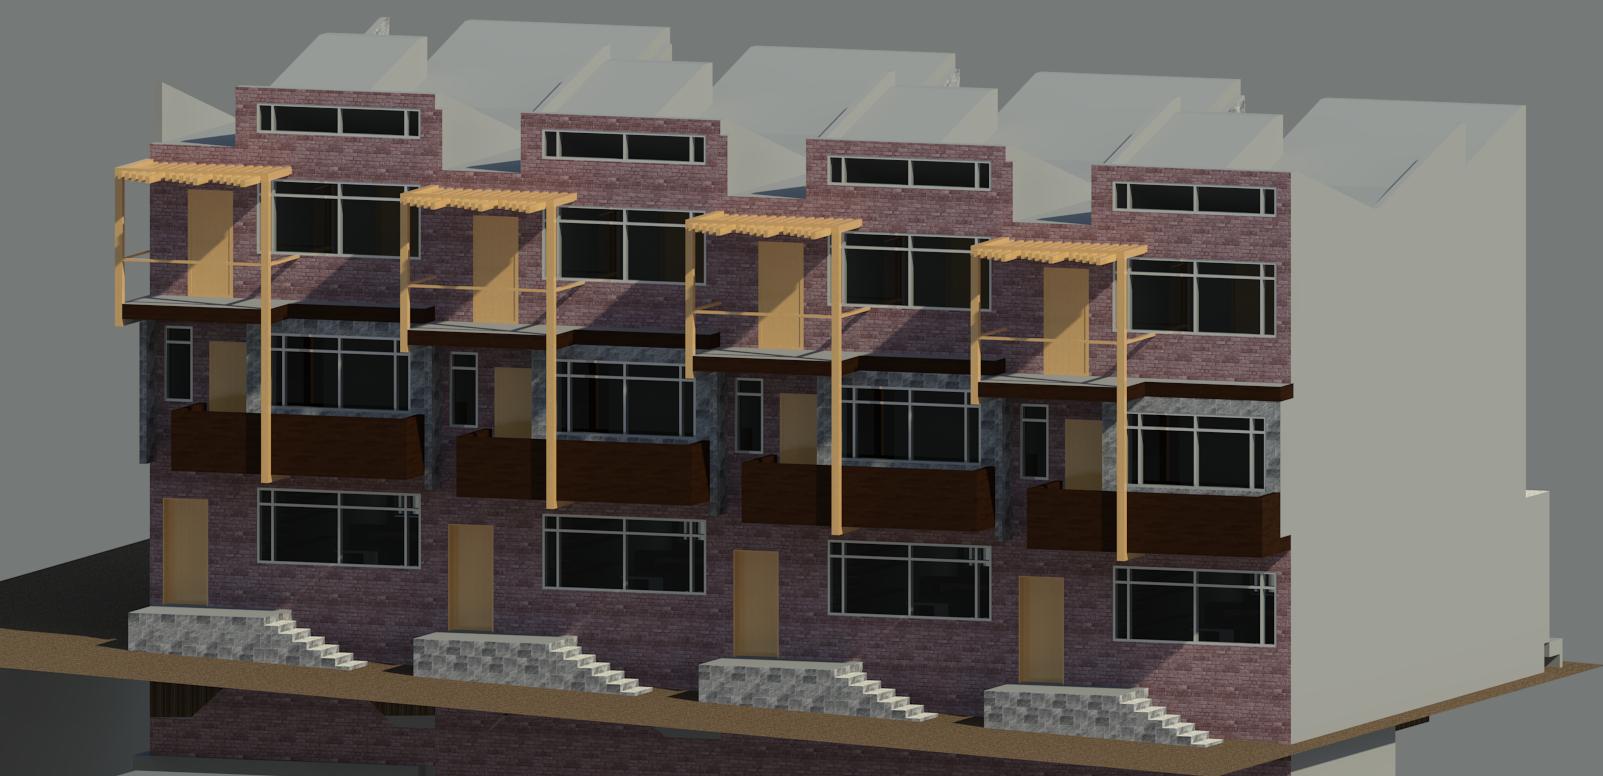 Rendered perspective of repeated eastern facade || Revit